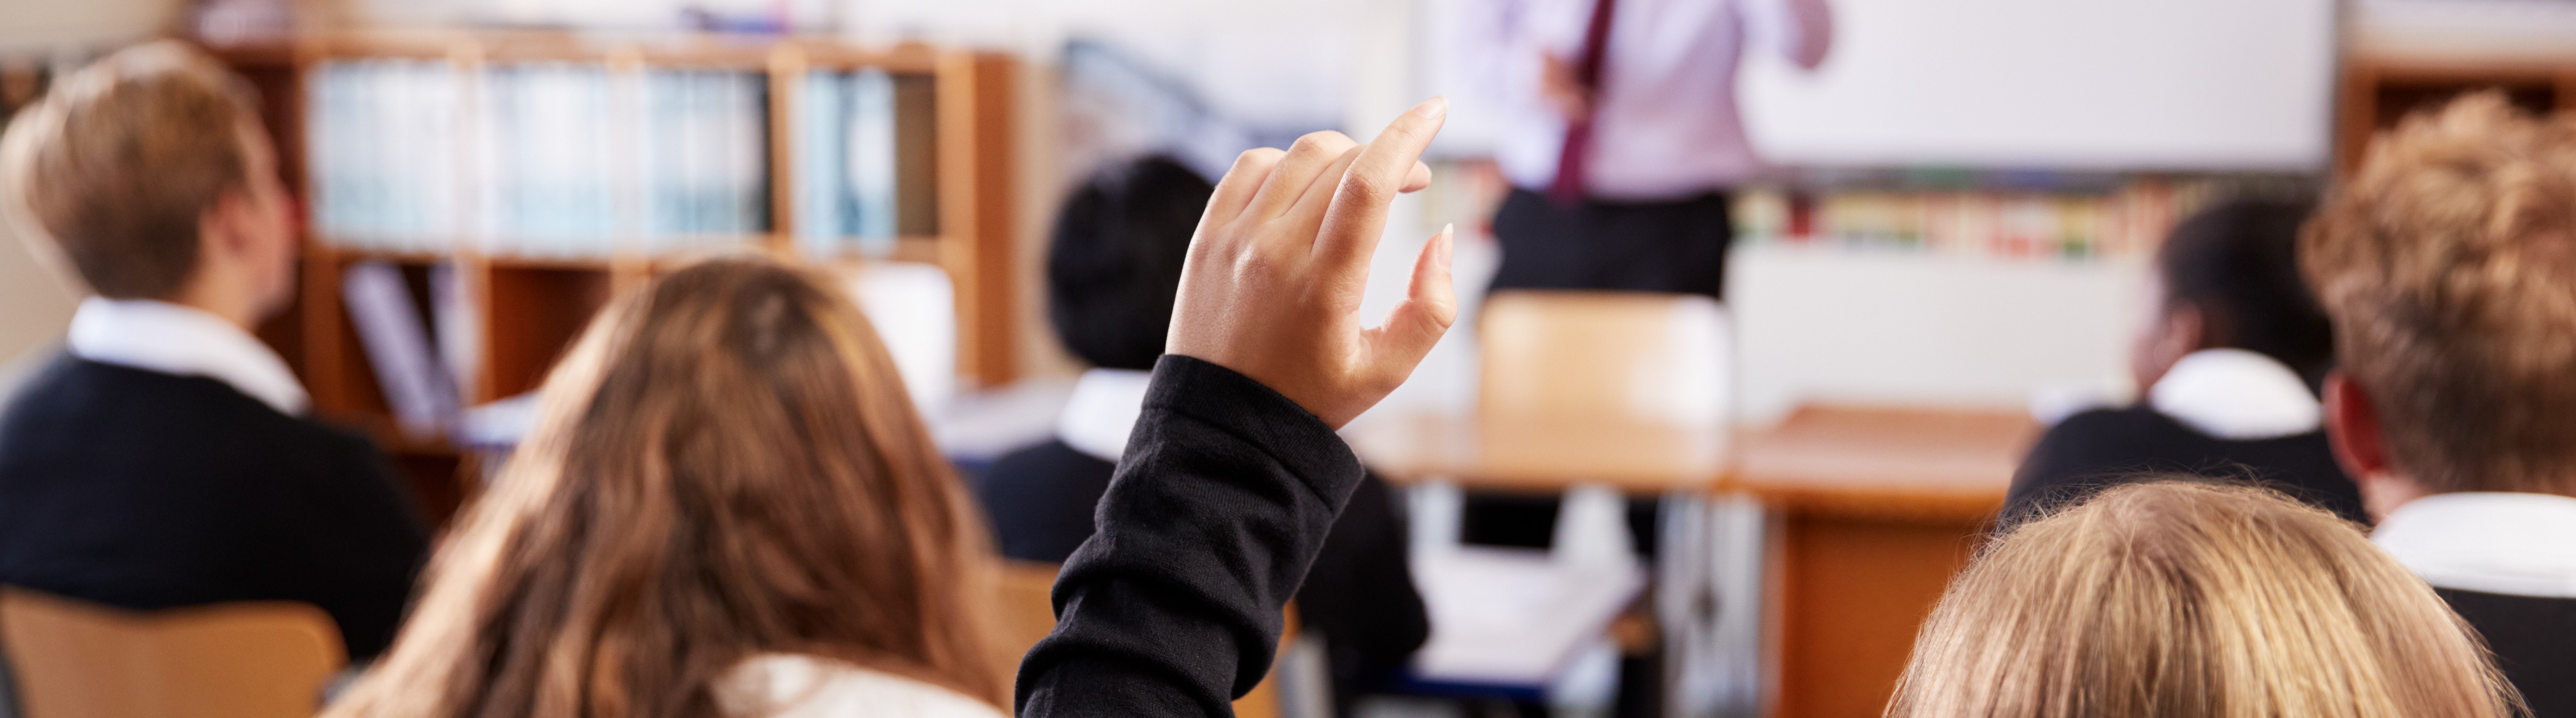 Learners with their hands up in a classroom